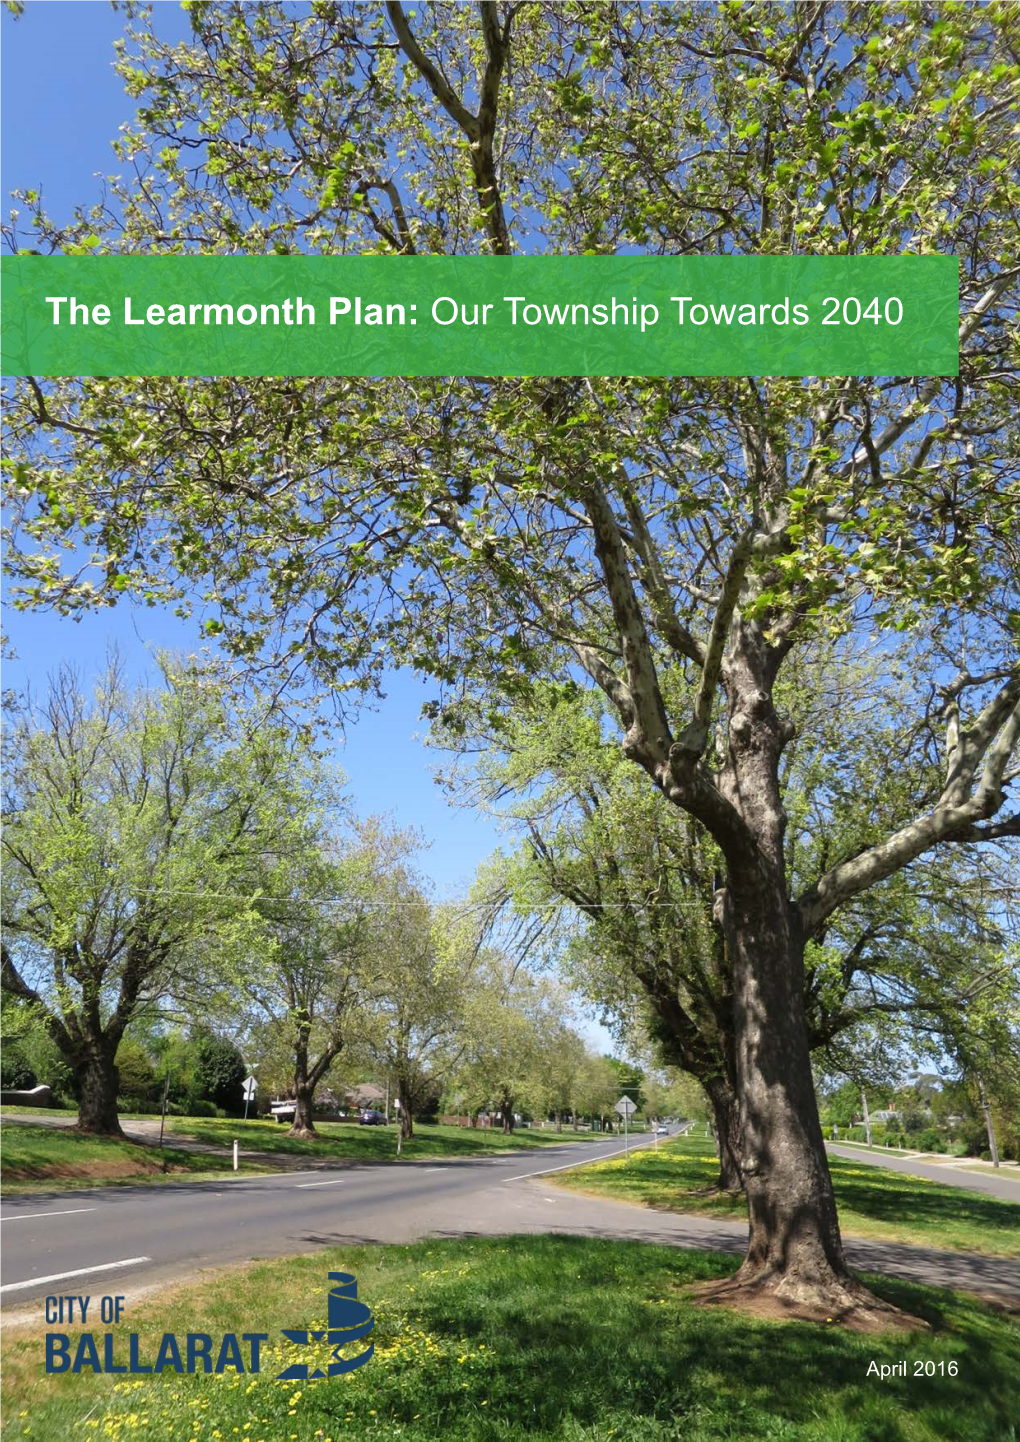 The Learmonth Plan: Our Township Towards 2040